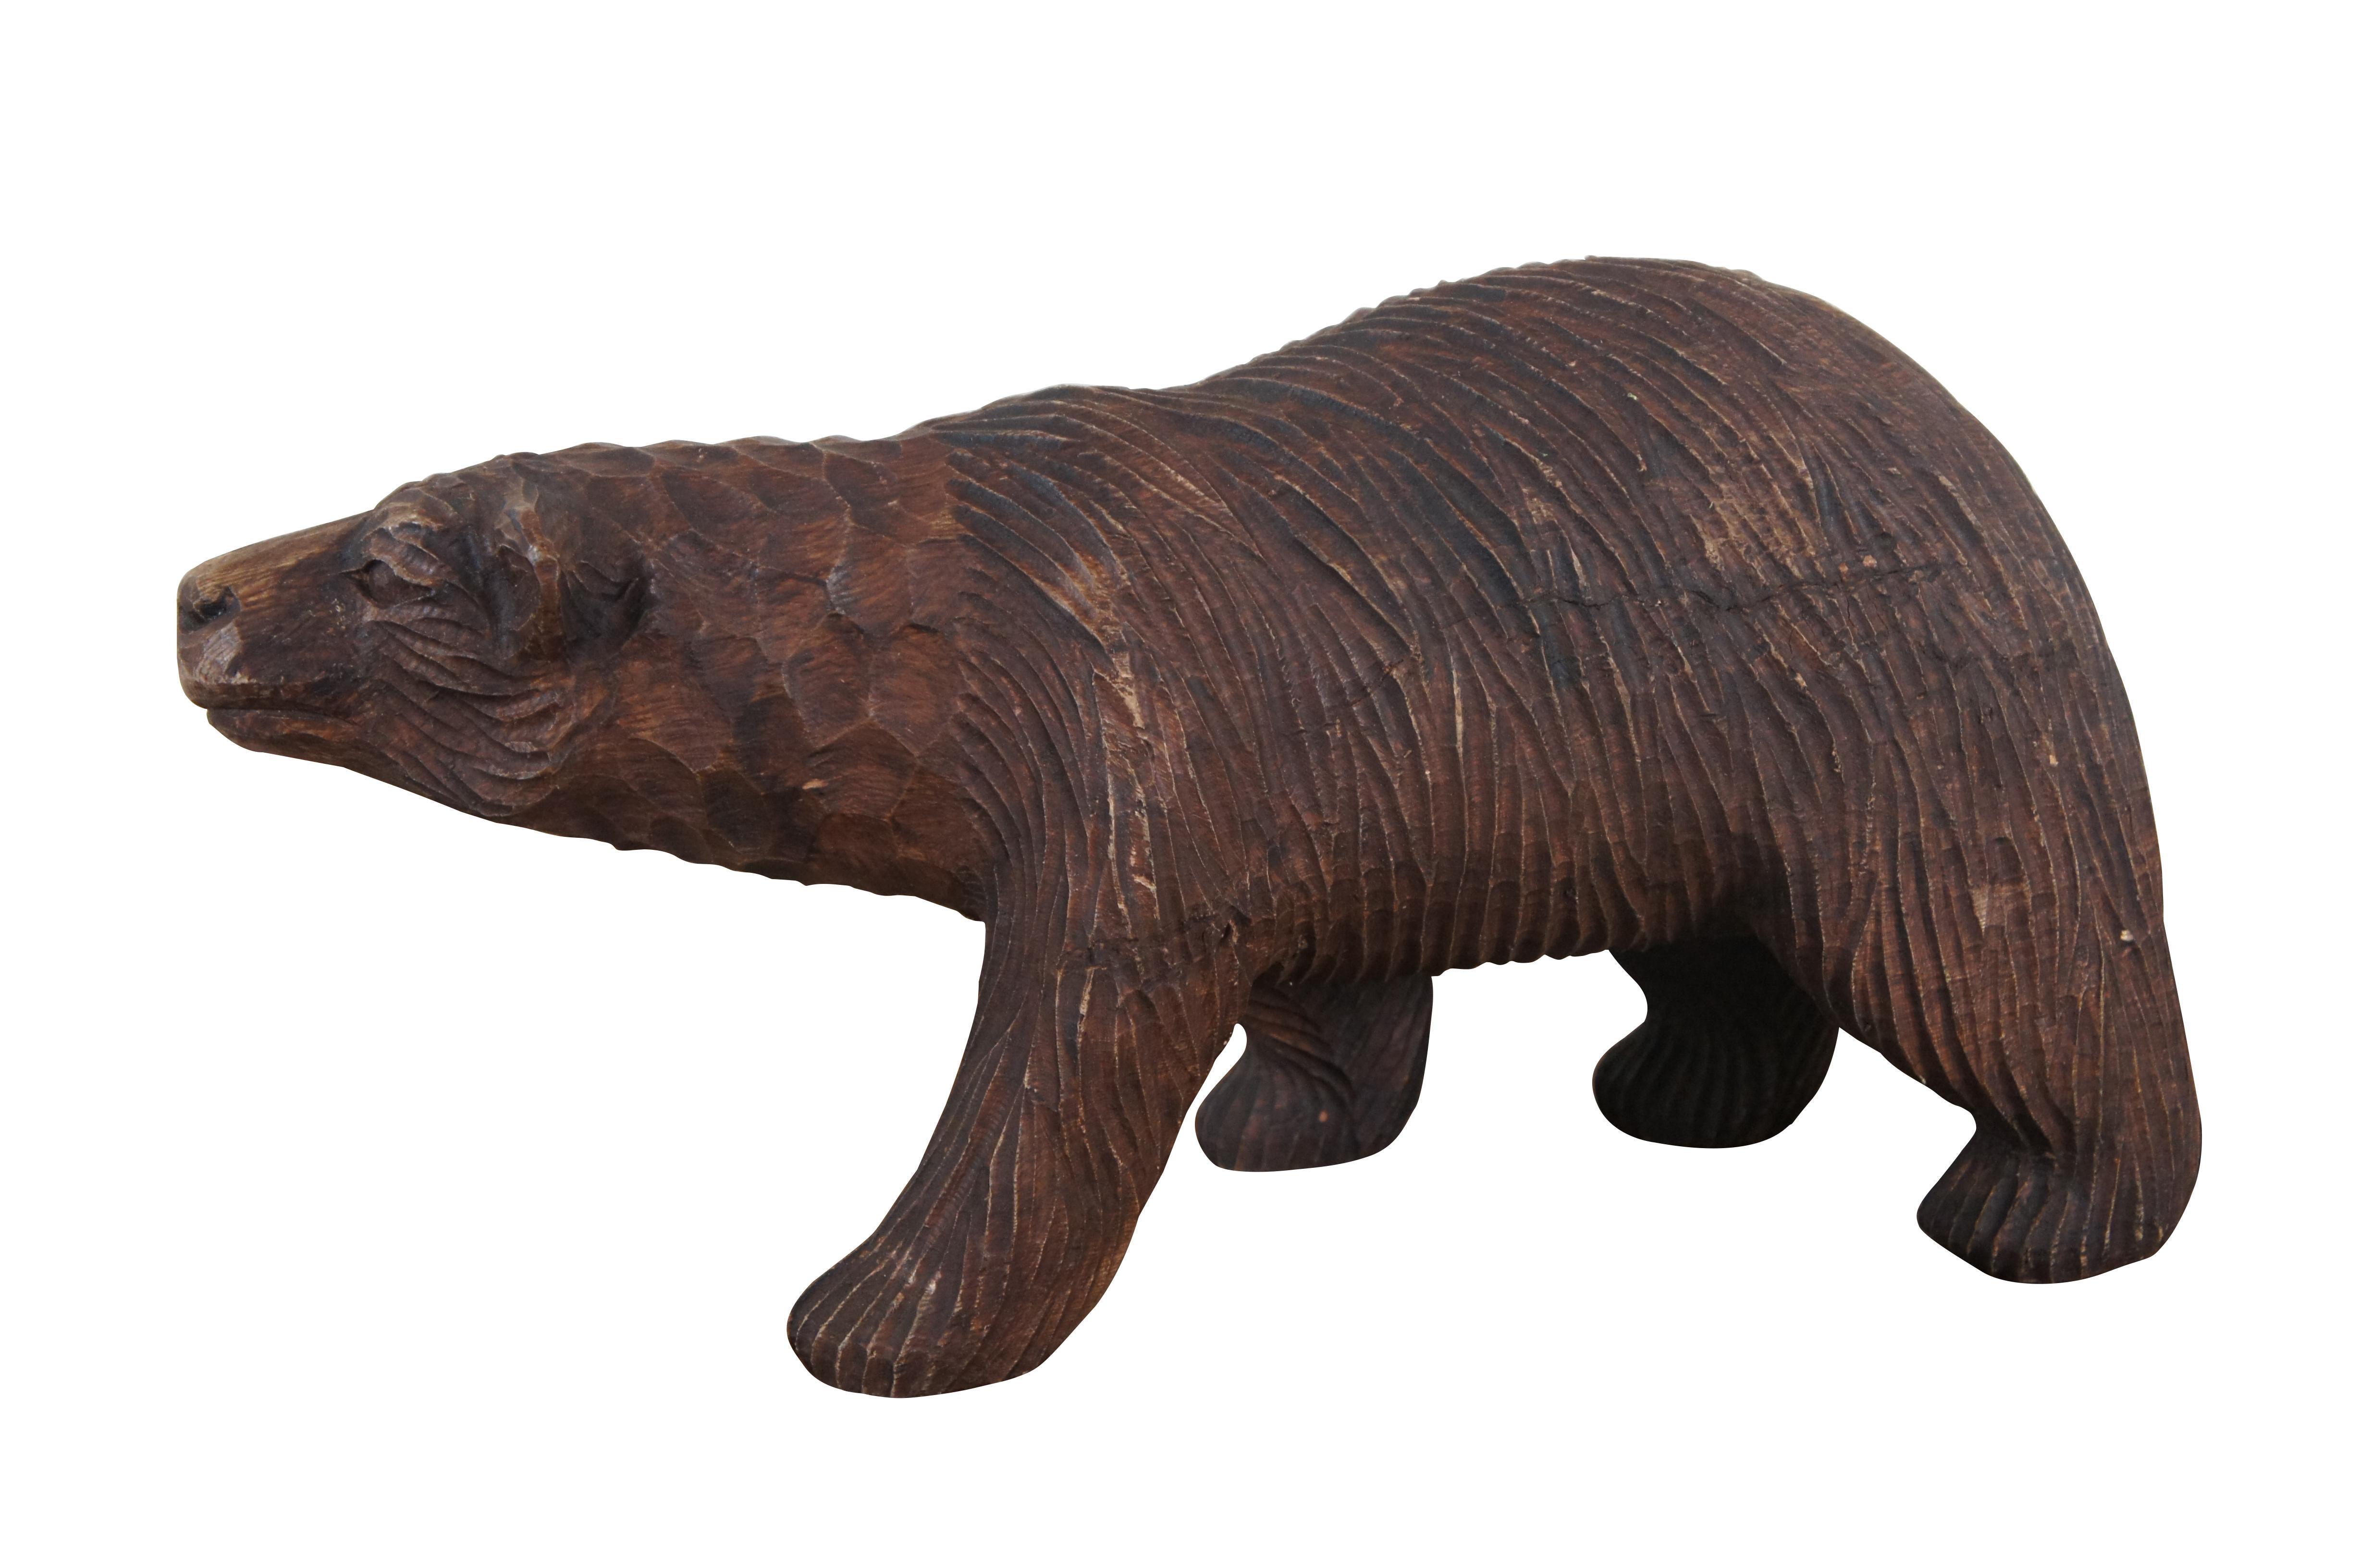 Vintage carved iron wood sculpture / figurine in the shape of a grizzly bear walking on all fours. Rustic hunting lodge decor.

Dimensions:
18